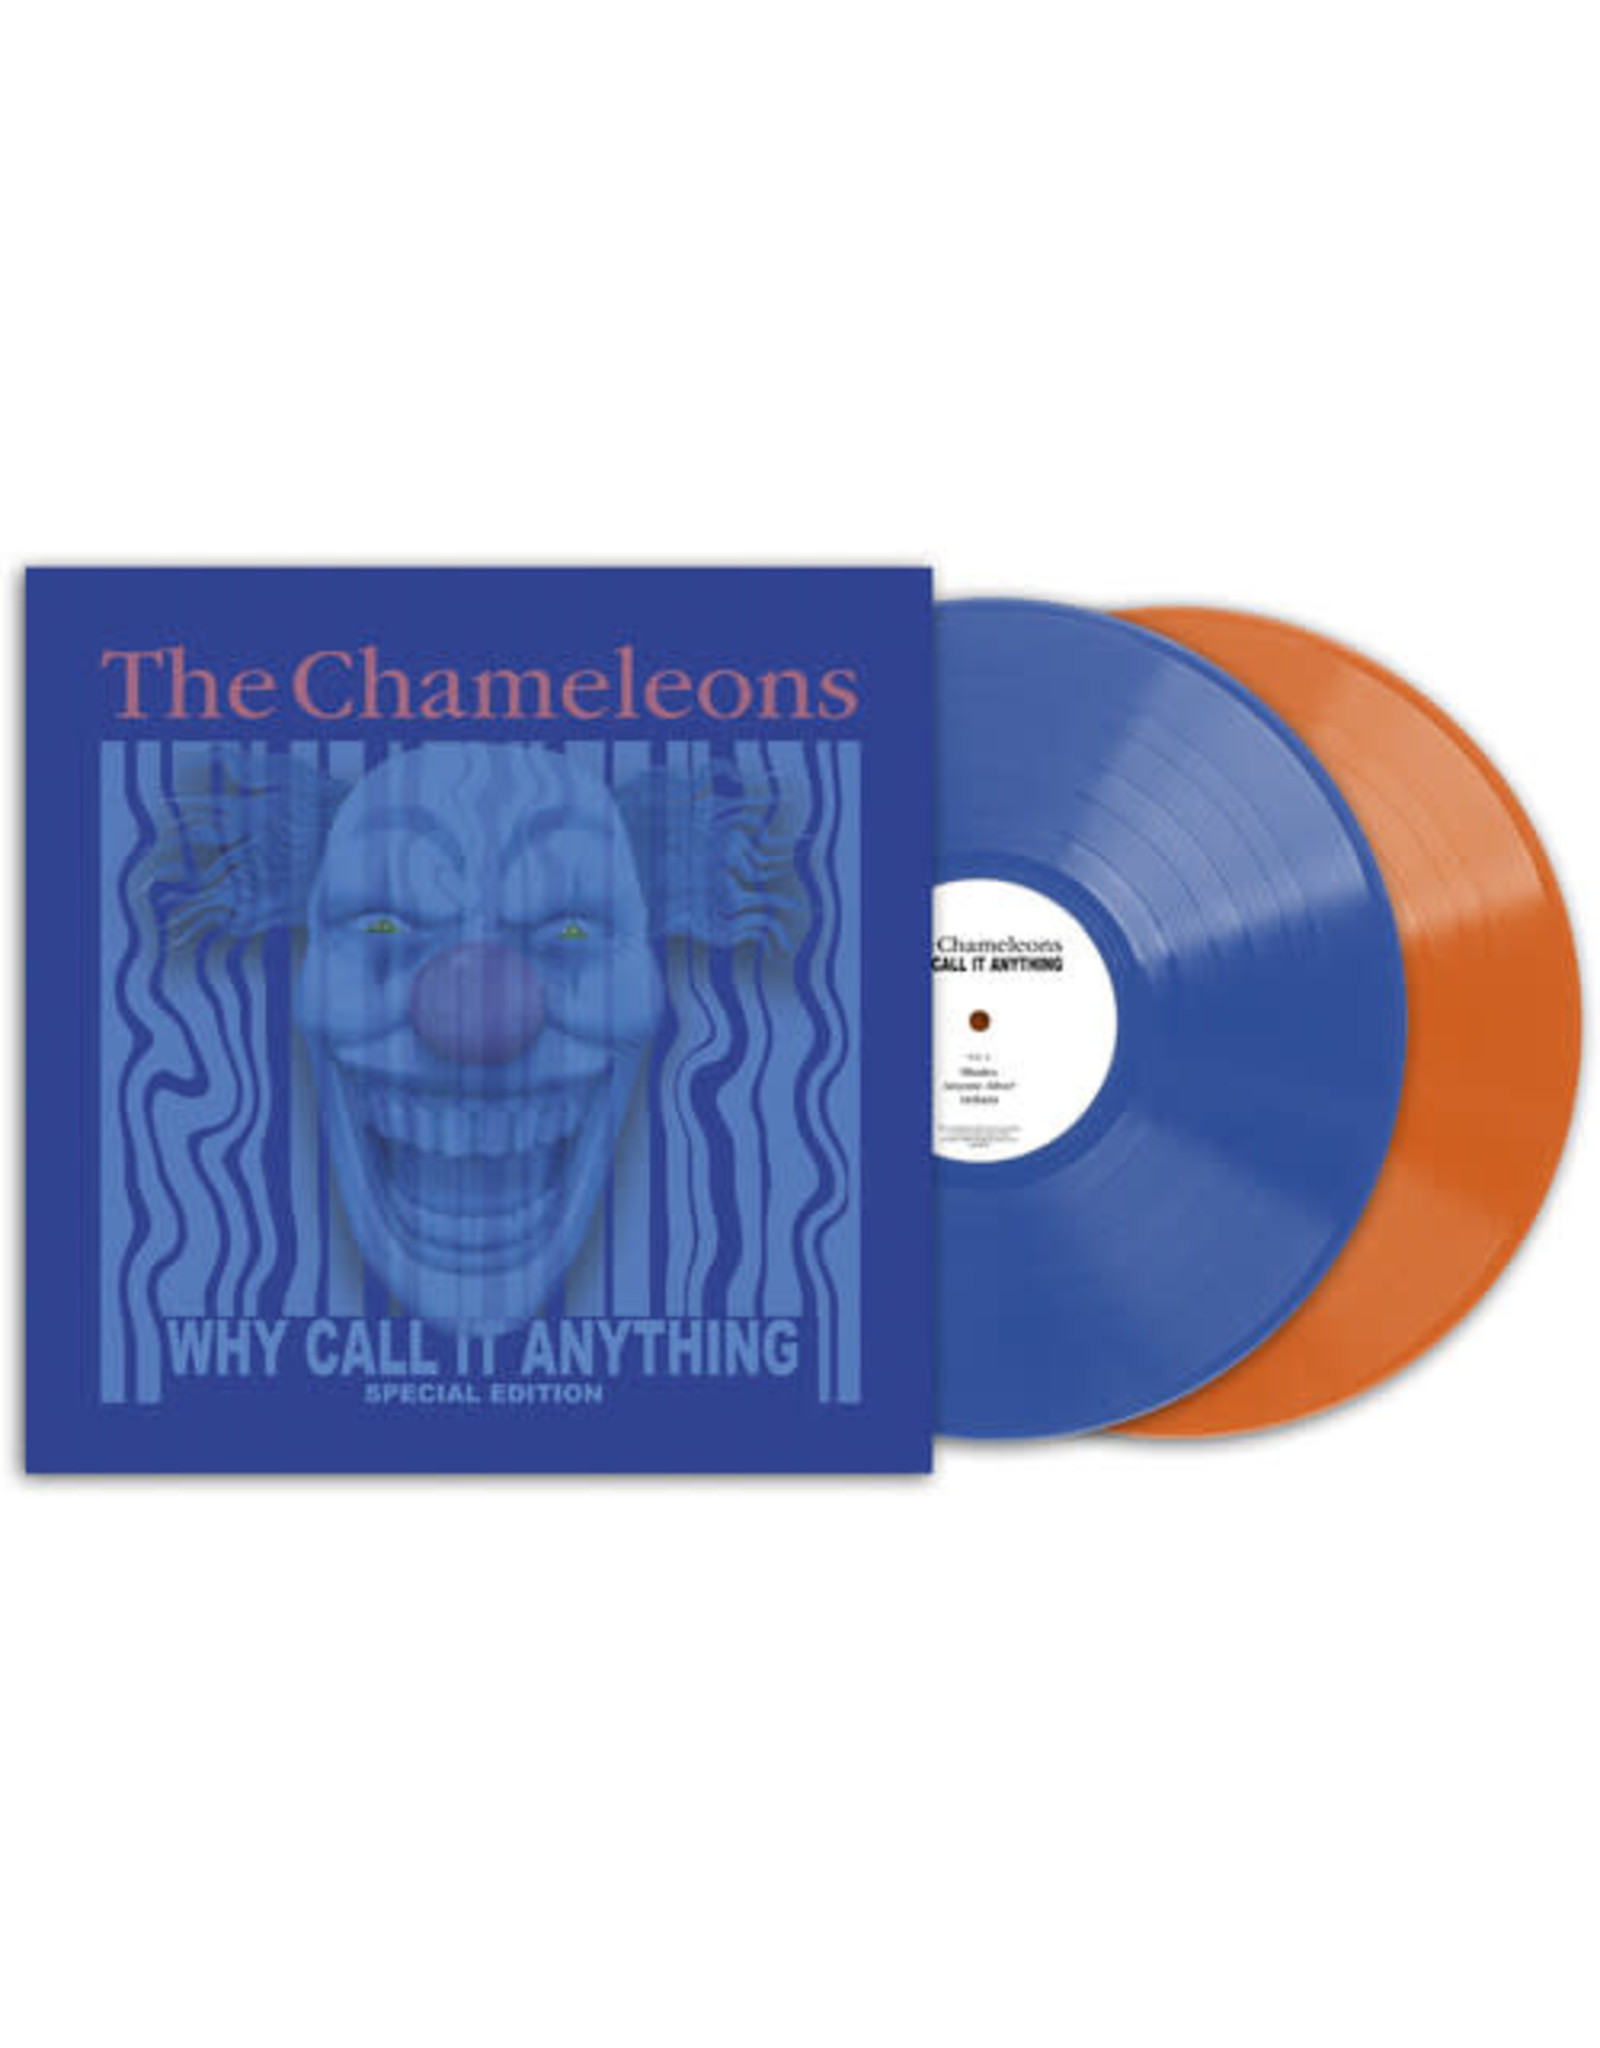 New Vinyl The Chameleons - Why Call It Anything (Special Ed.) 2LP